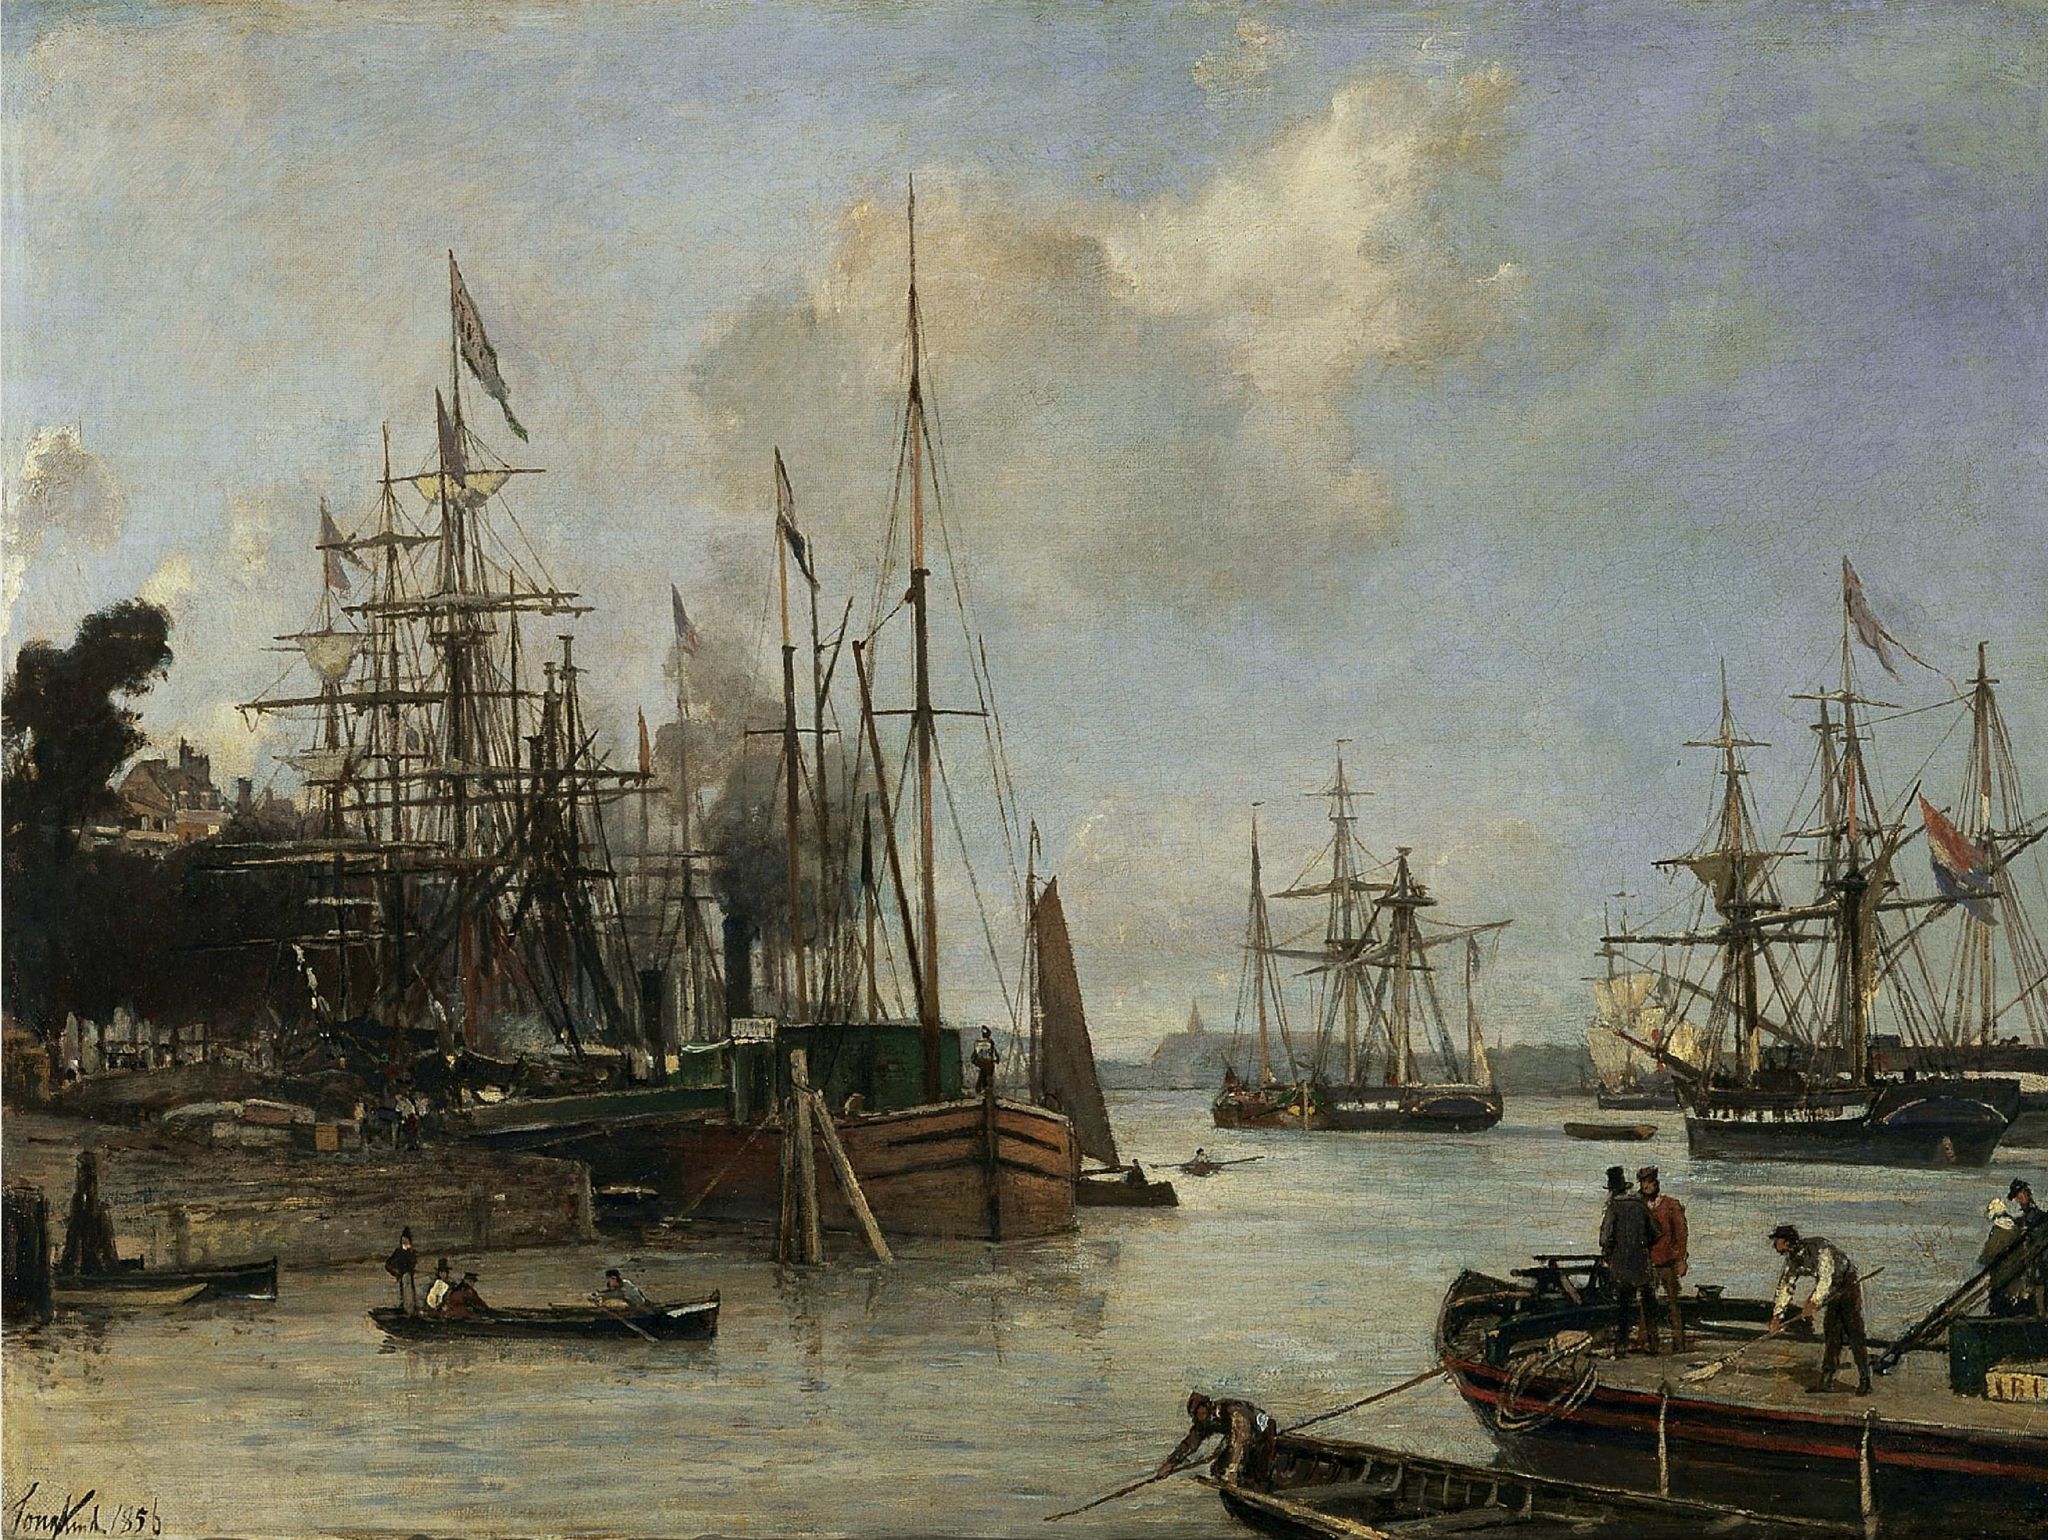 A View of the Harbour, Rotterdam